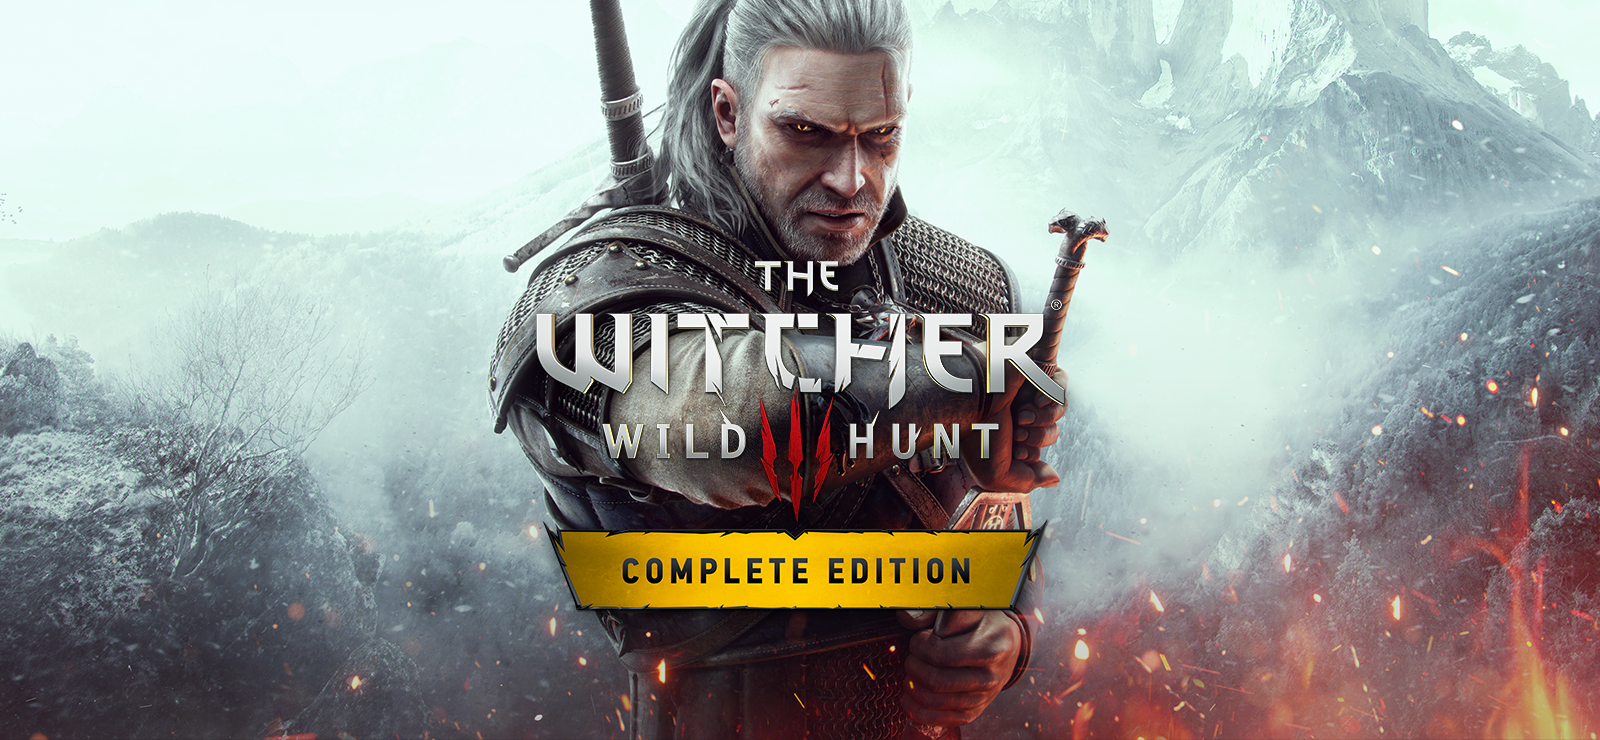 BESTSELLER - The Witcher 3: Wild Hunt - Complete Edition